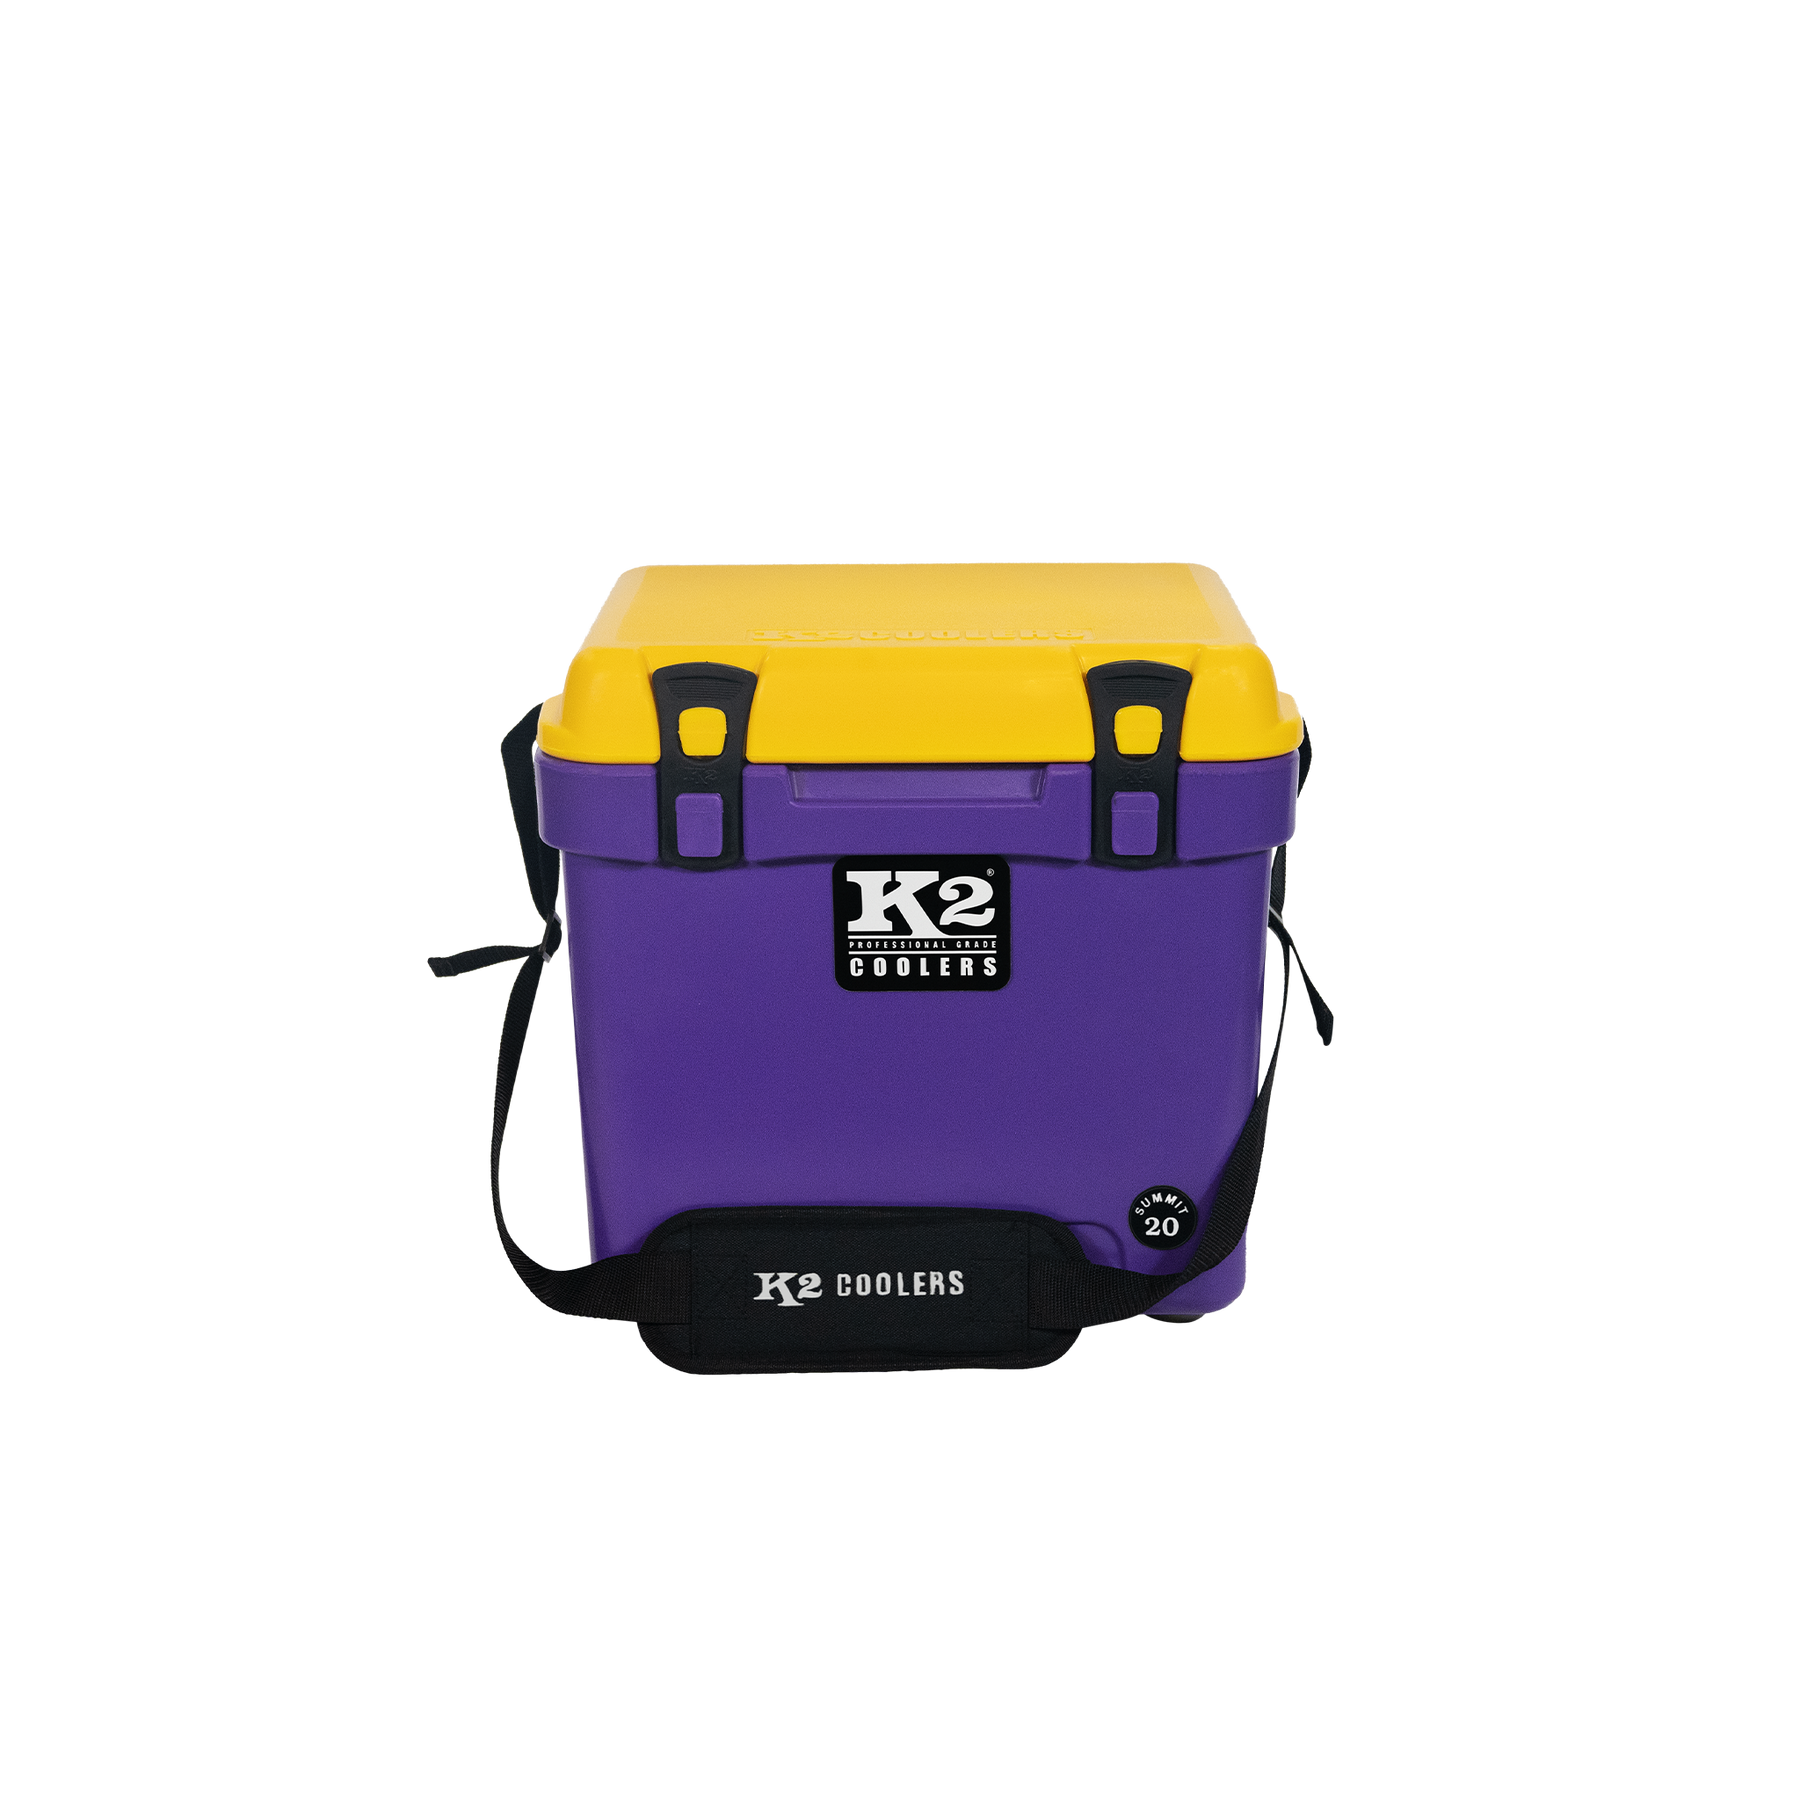 K2 Summit Cooler Review - The Cooler Zone